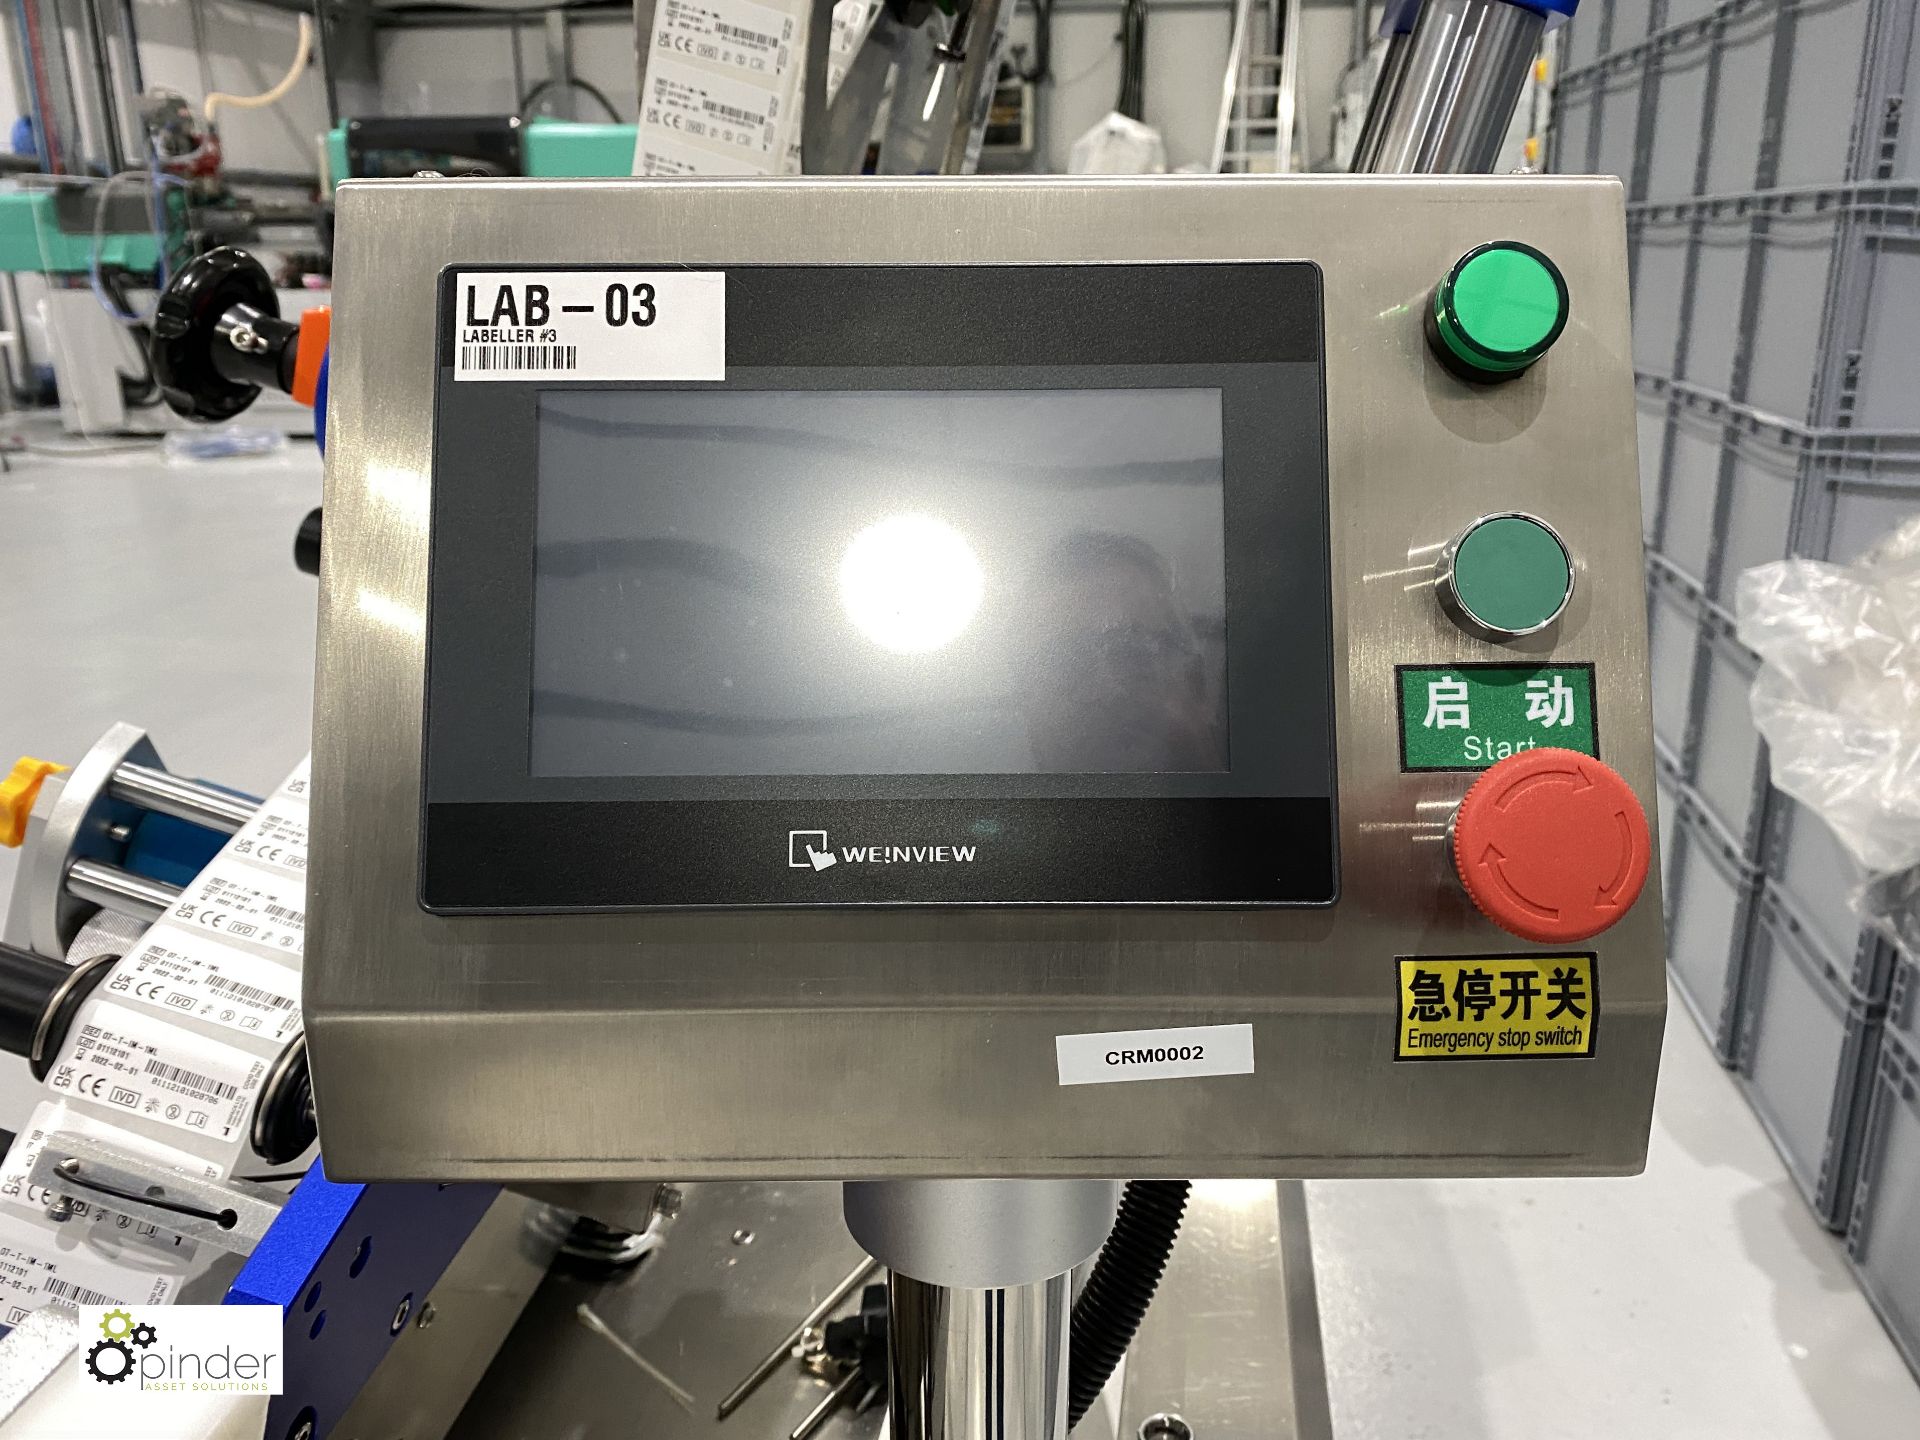 Brightwin Packaging Machinery Co Ltd BWL stainless steel Labeller for use applying labels to - Image 4 of 13